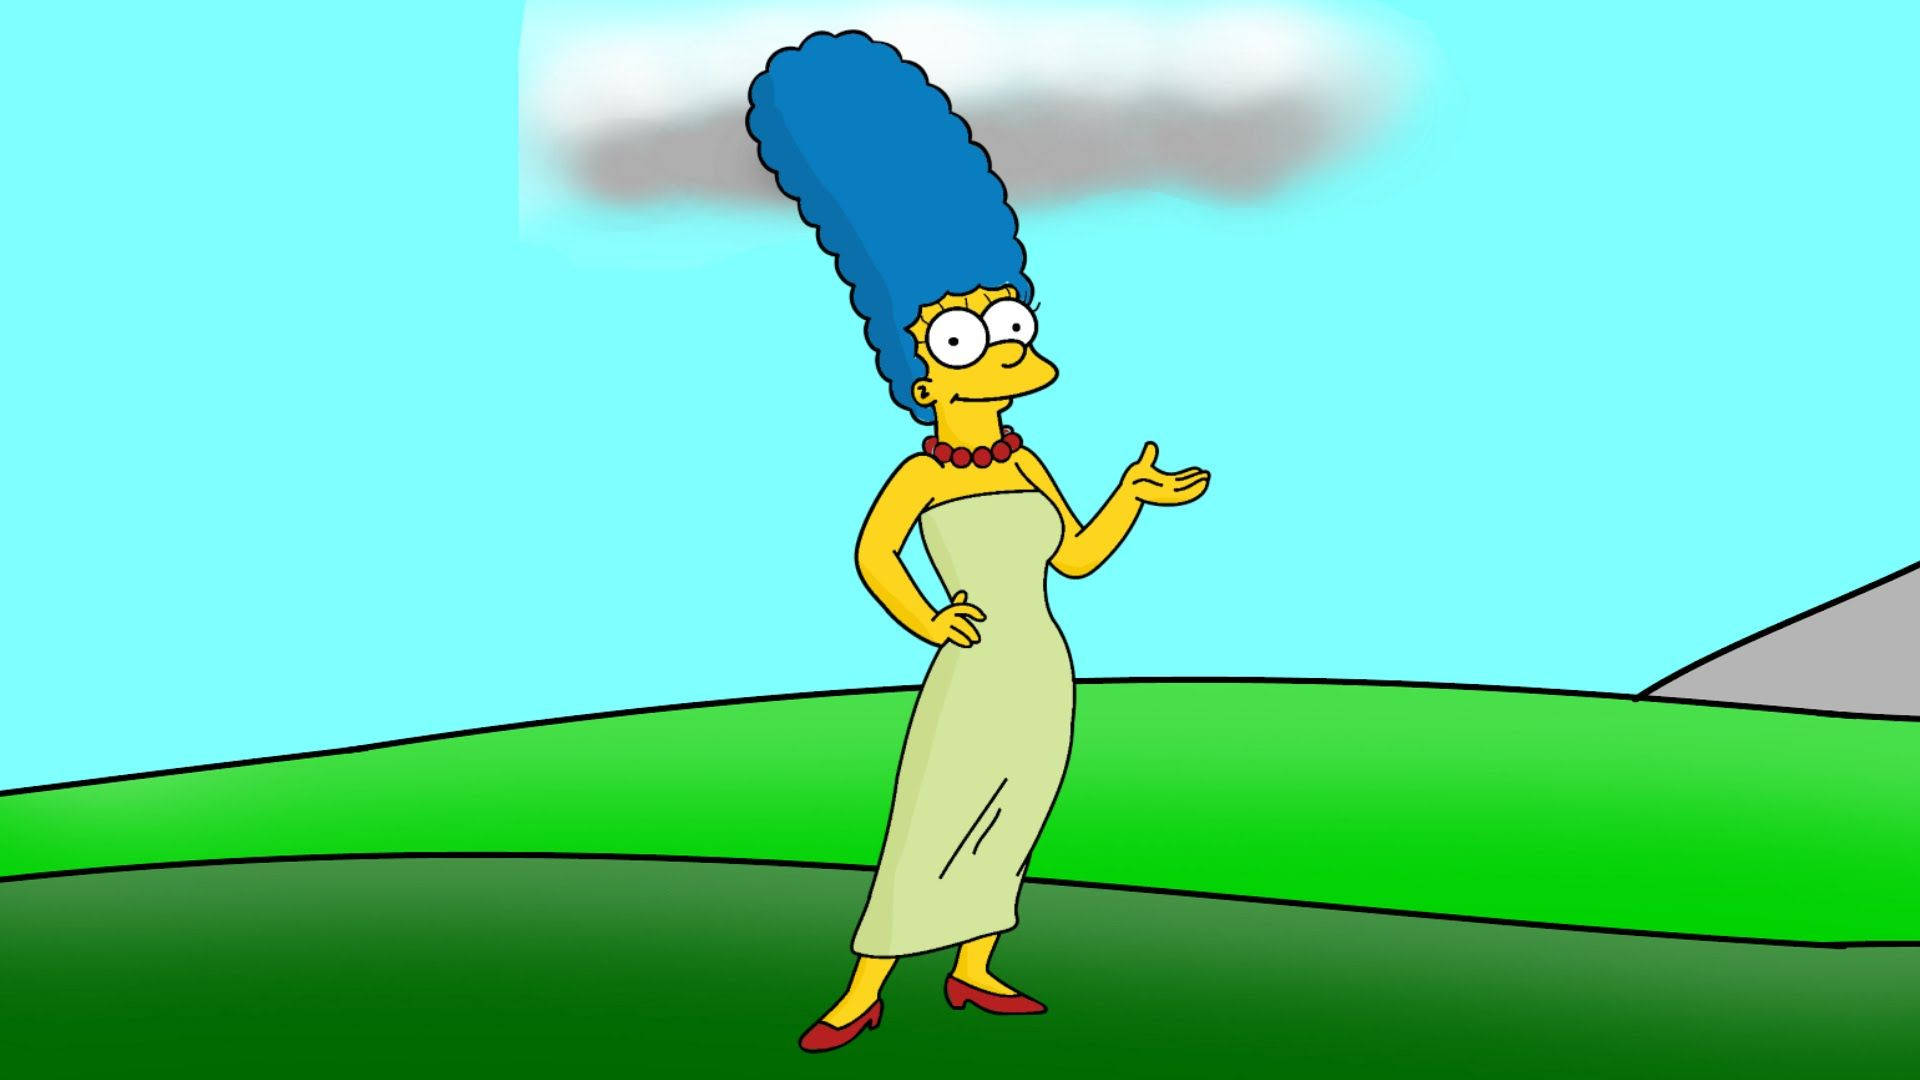 Marge Simpson Wallpaper Images